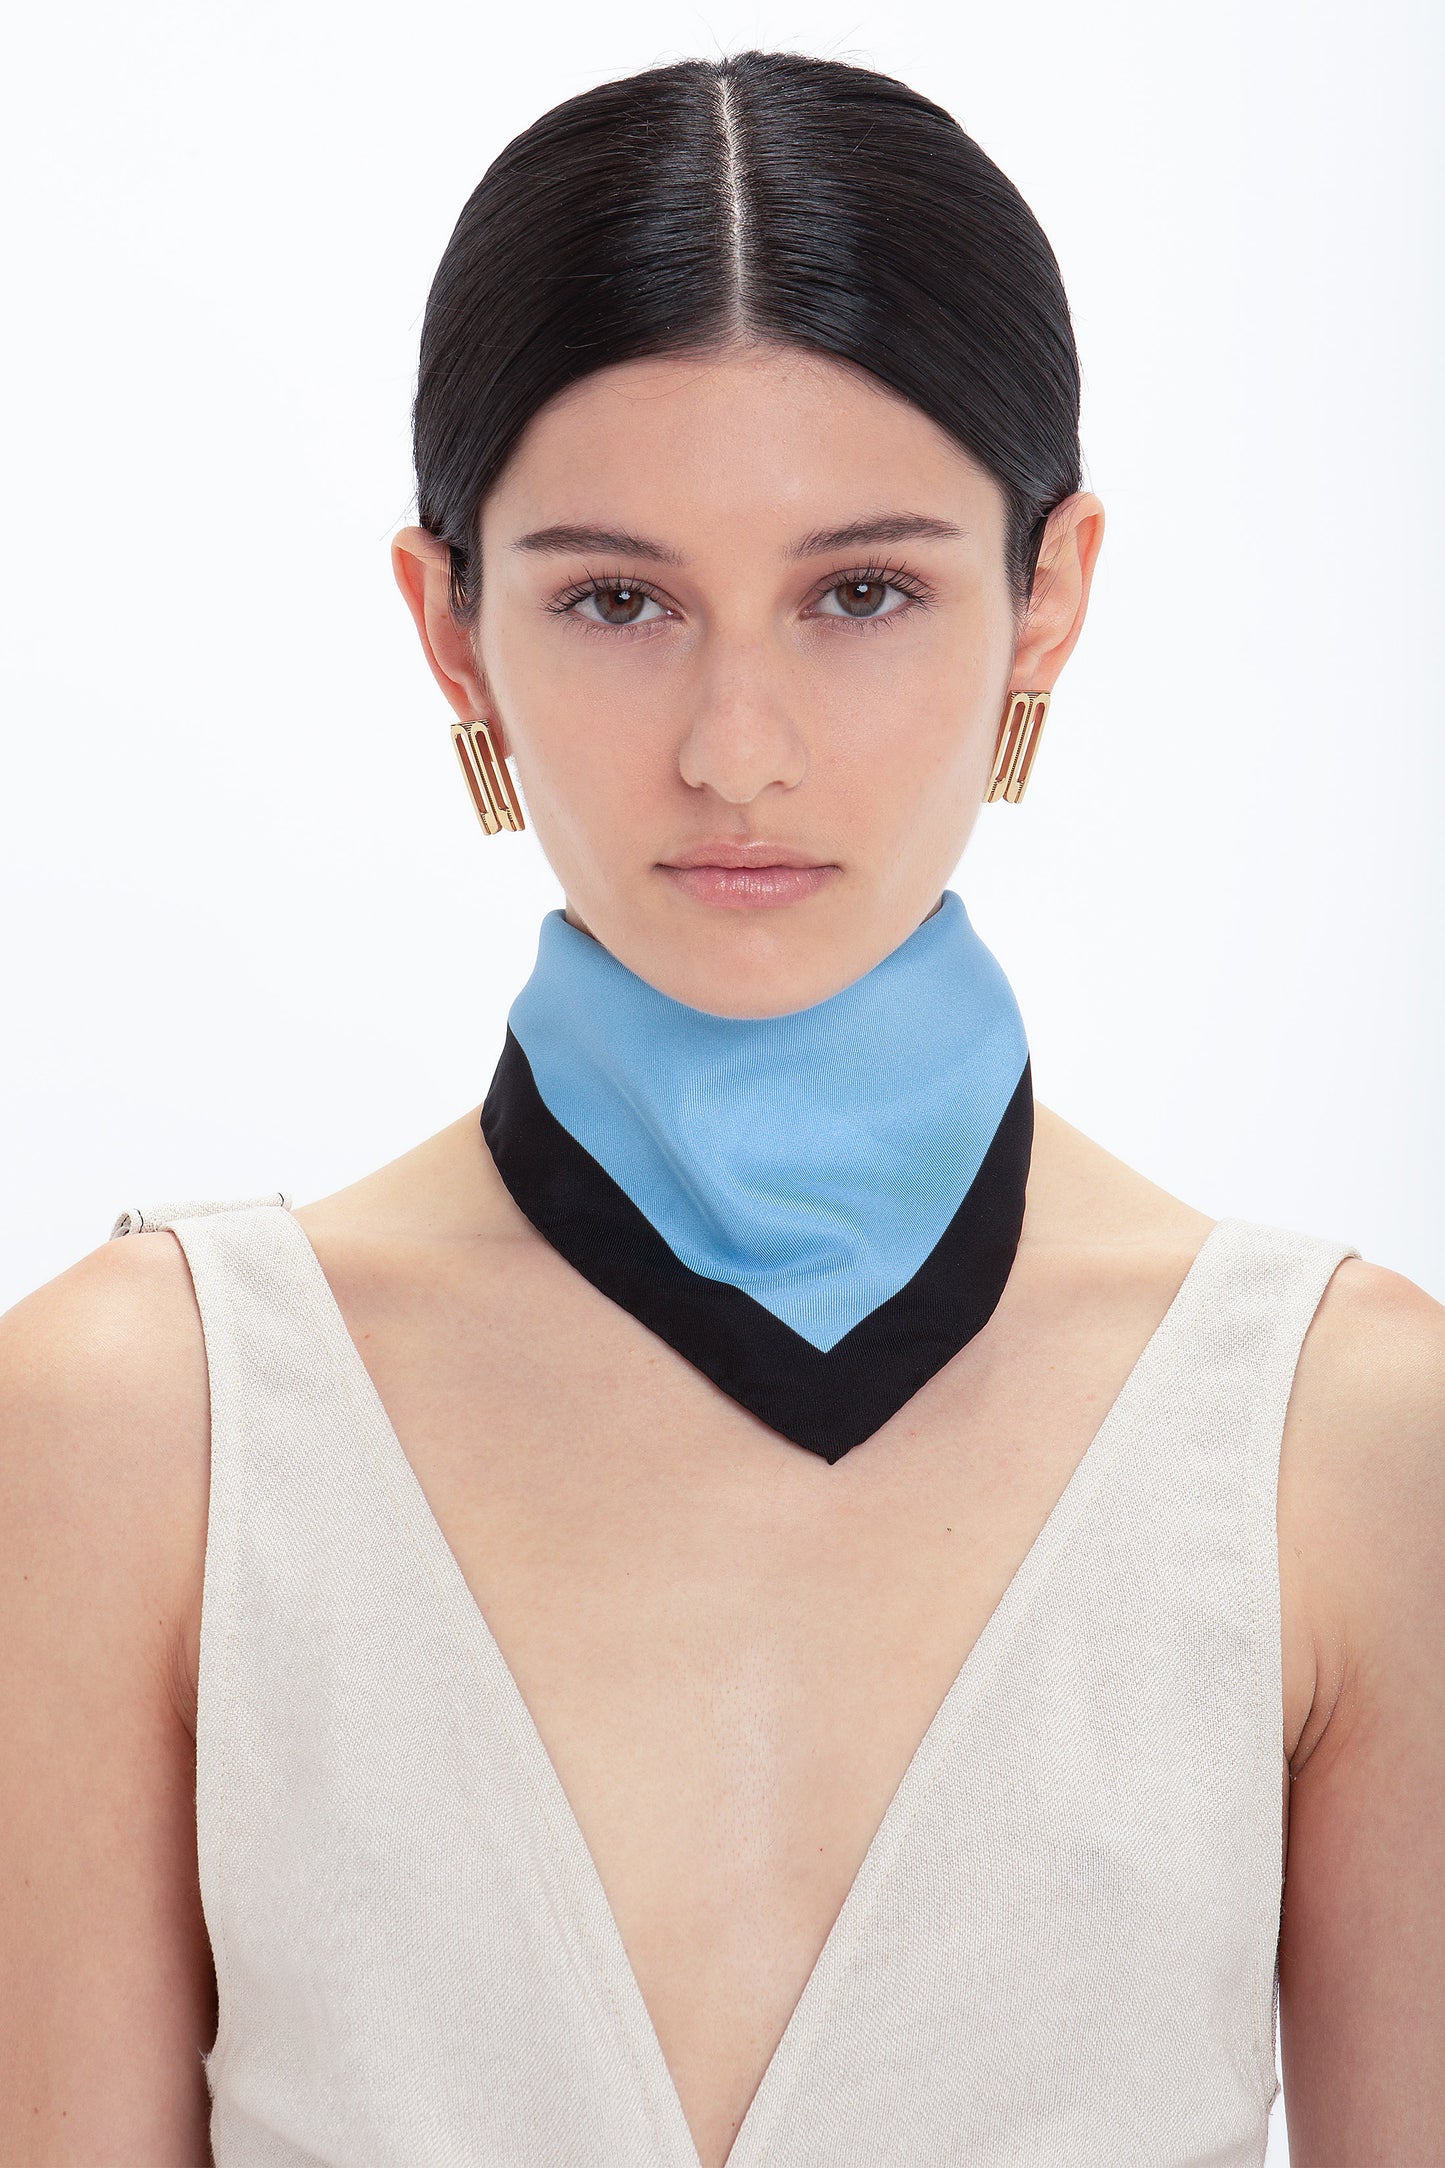 Woman with center-parted dark hair, wearing large hoop earrings, a beige dress, and a Colour Block Foulard In Marina printed silk twill with black border from Victoria Beckham.